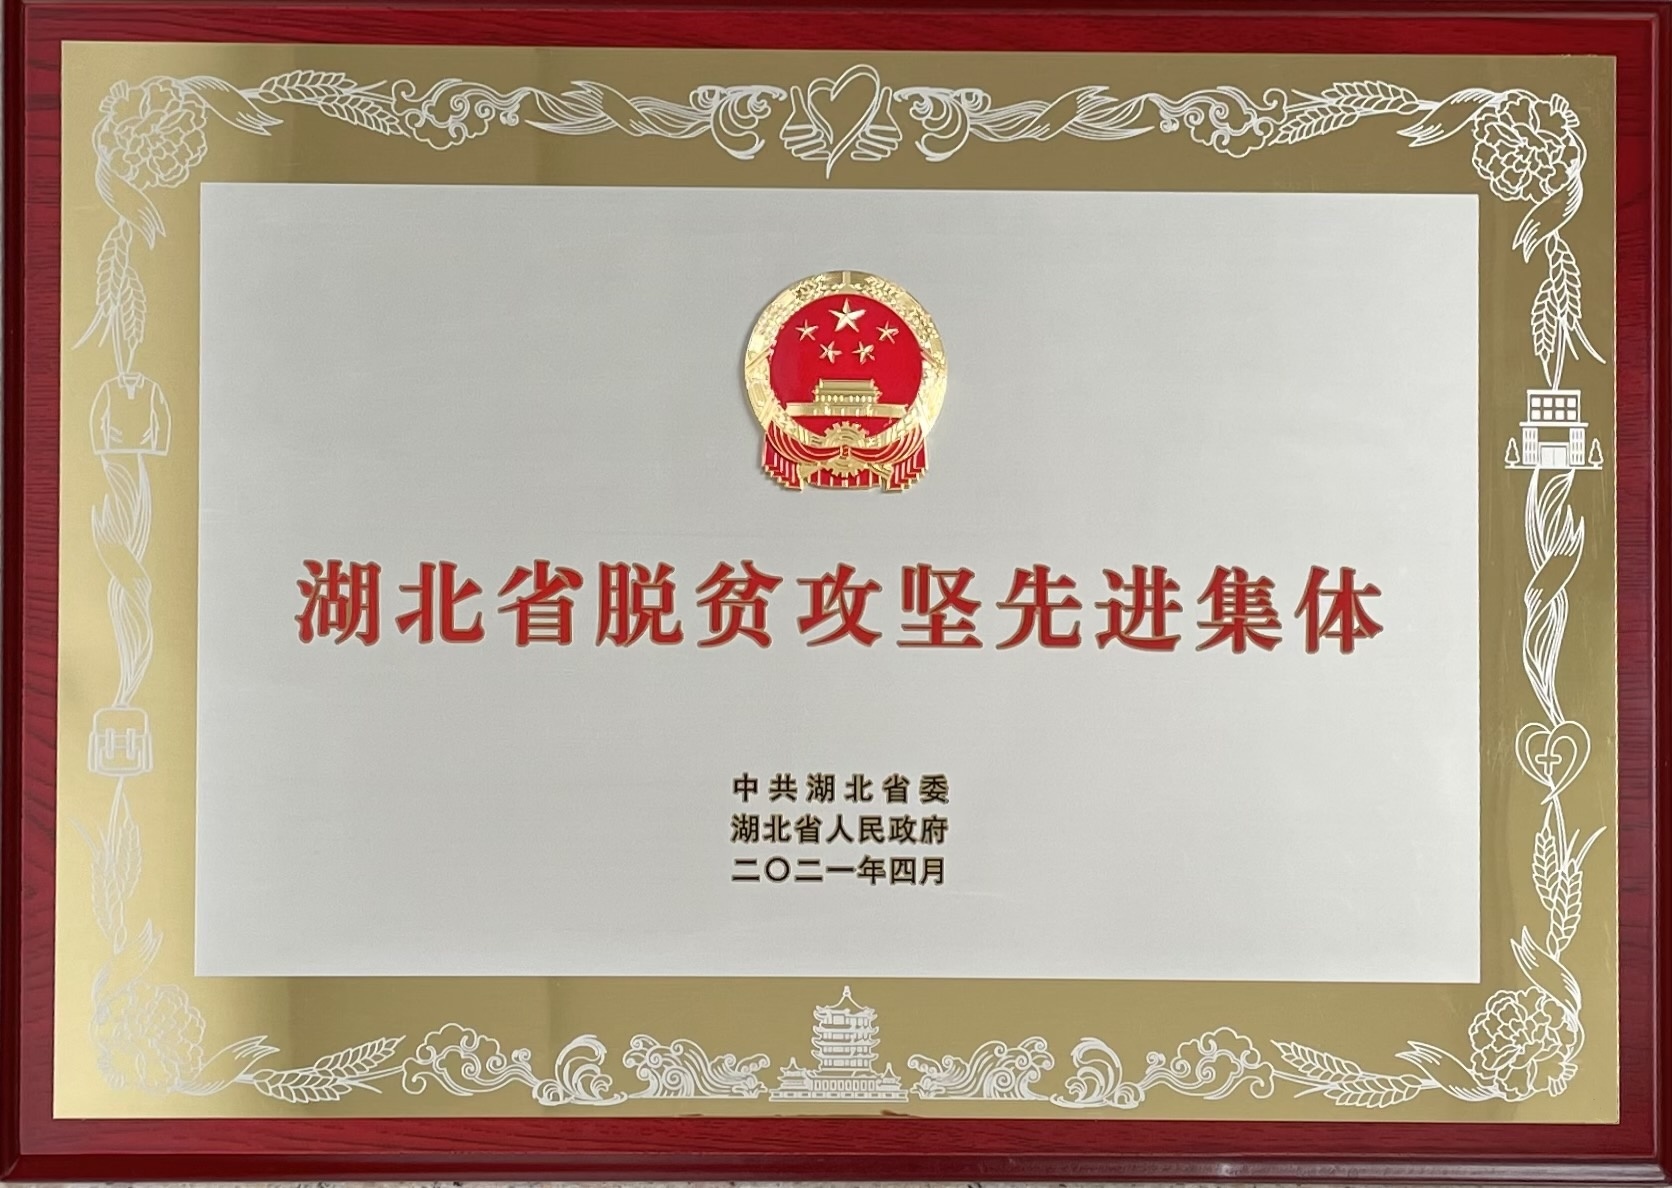 Advanced Collective for Poverty Alleviation in Hubei Province